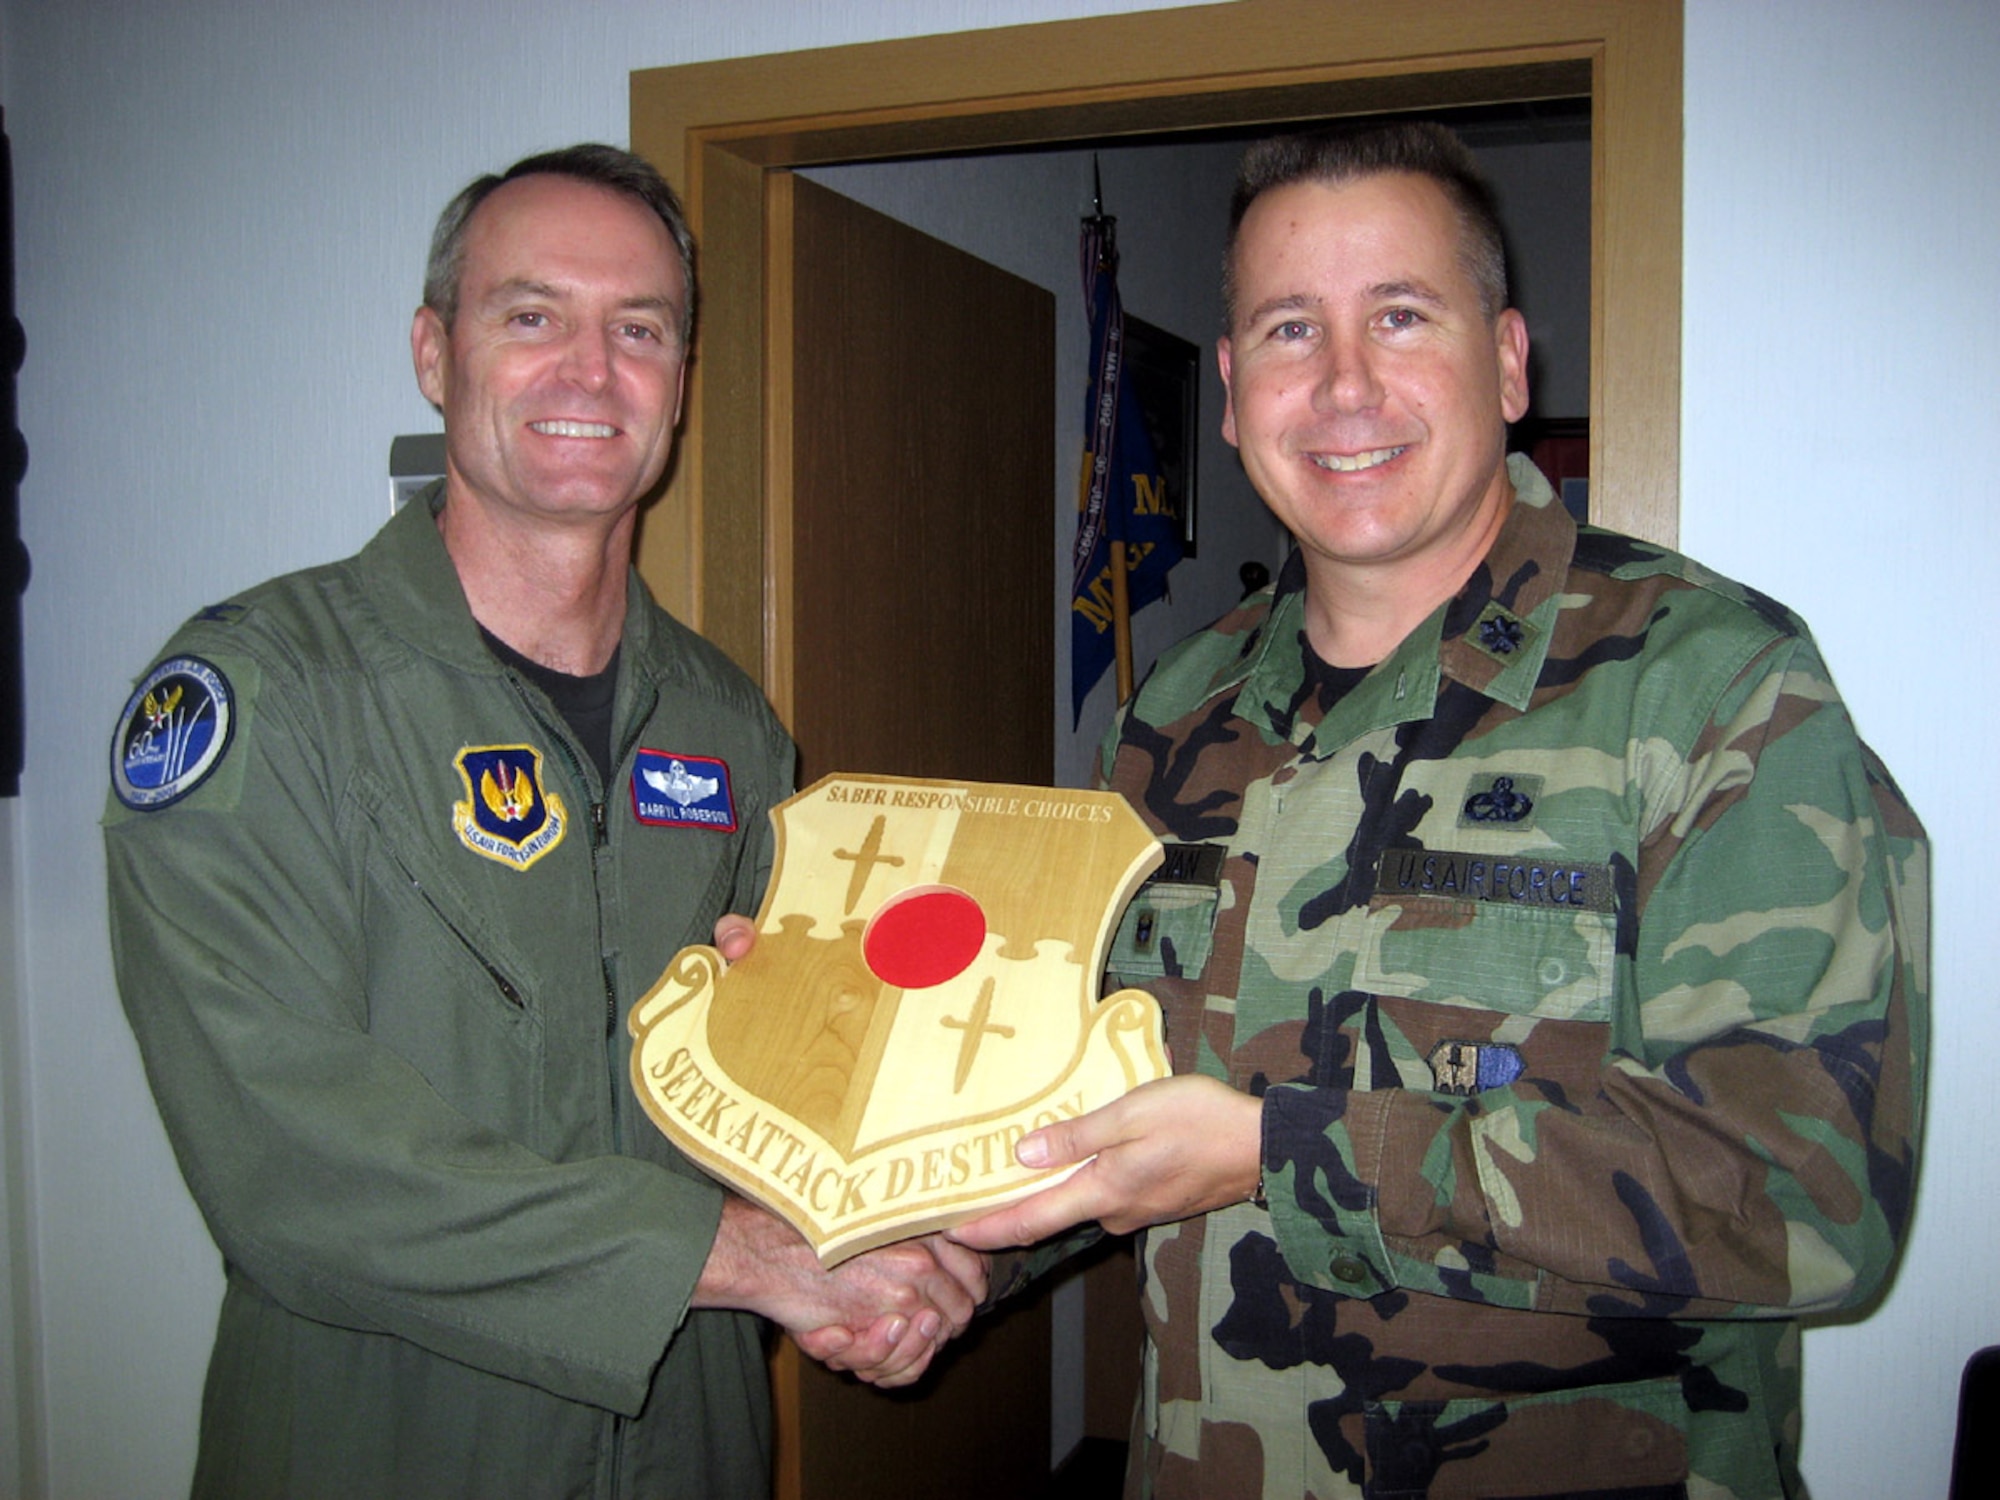 SPANGDAHLEM AIR BASE, Germany – Col. Darryl Roberson, 52nd Fighter Wing commander, presents a Responsible Choices plaque to Lt. Col. Edward Sullivan, 52nd Maintenance Group deputy commander, at the 52nd MXG office Aug. 28. (U.S. Air Force photo/Staff Sgt. Andrea Knudson)